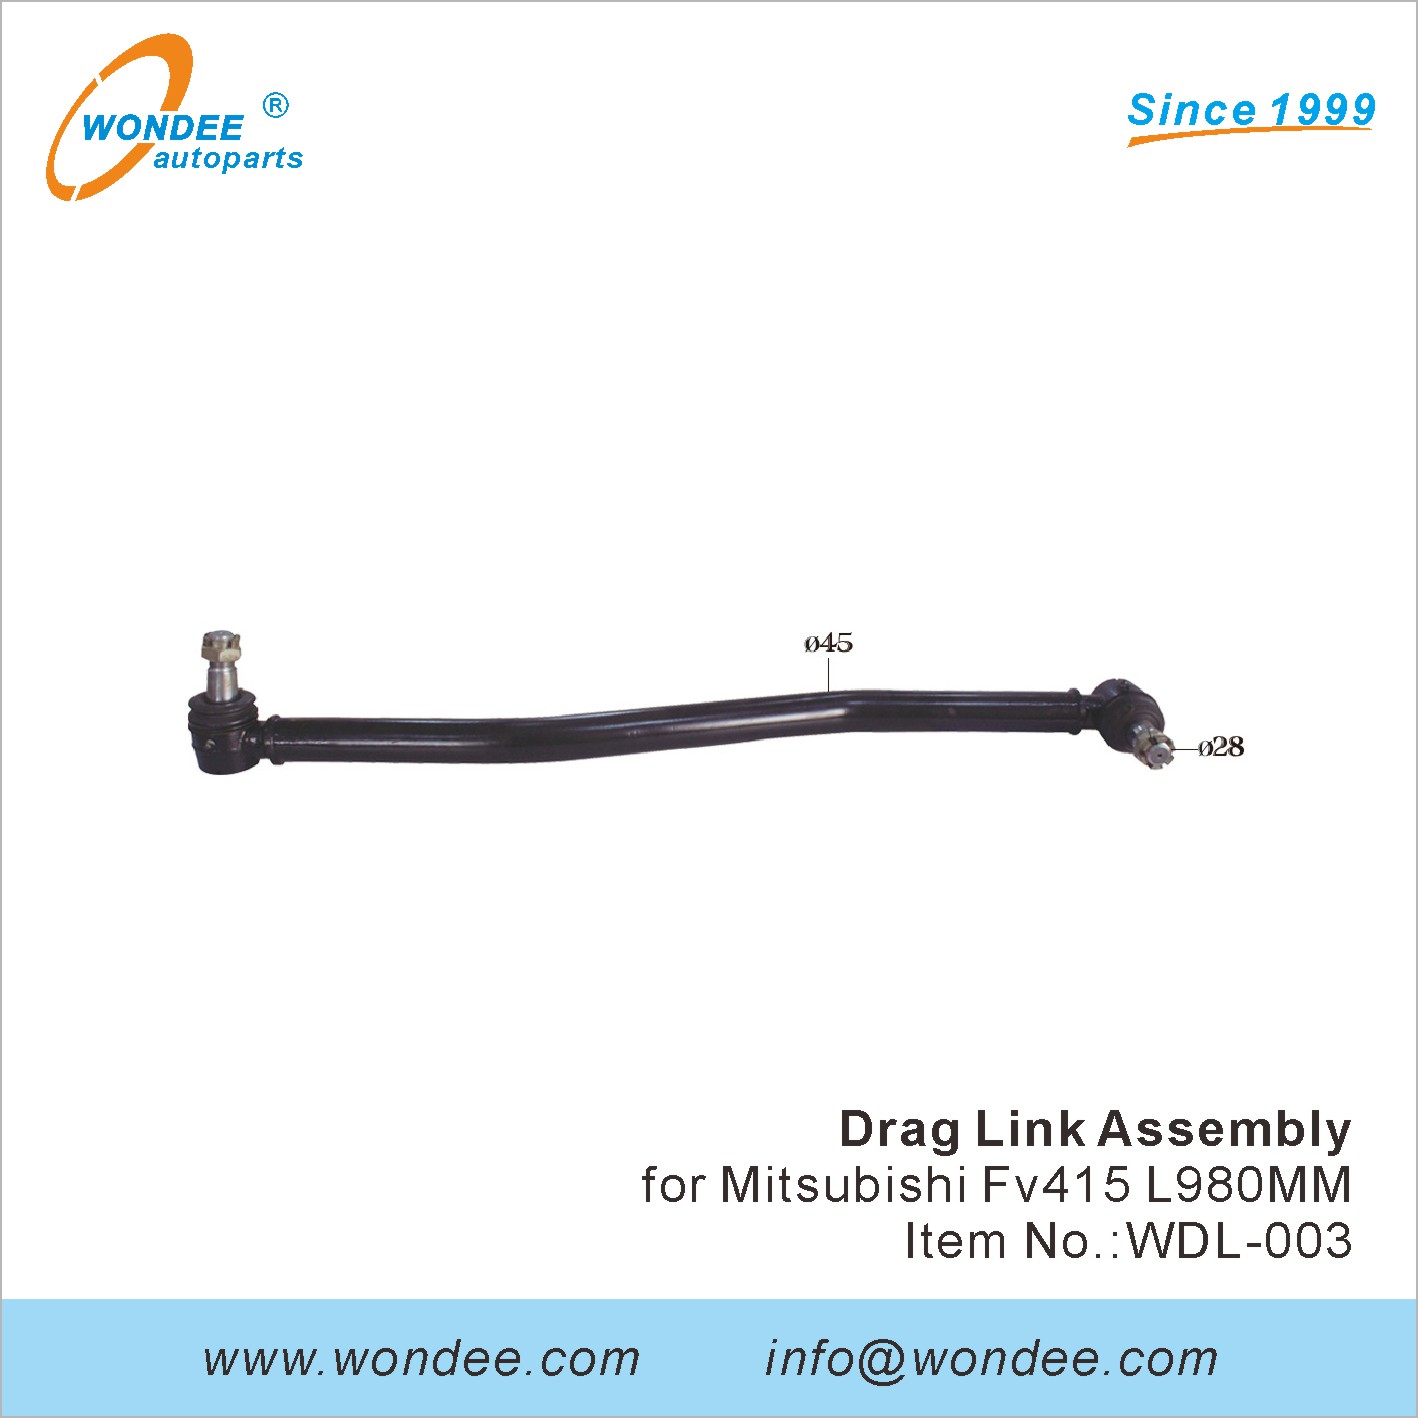 WONDEE drag link assembly (3)